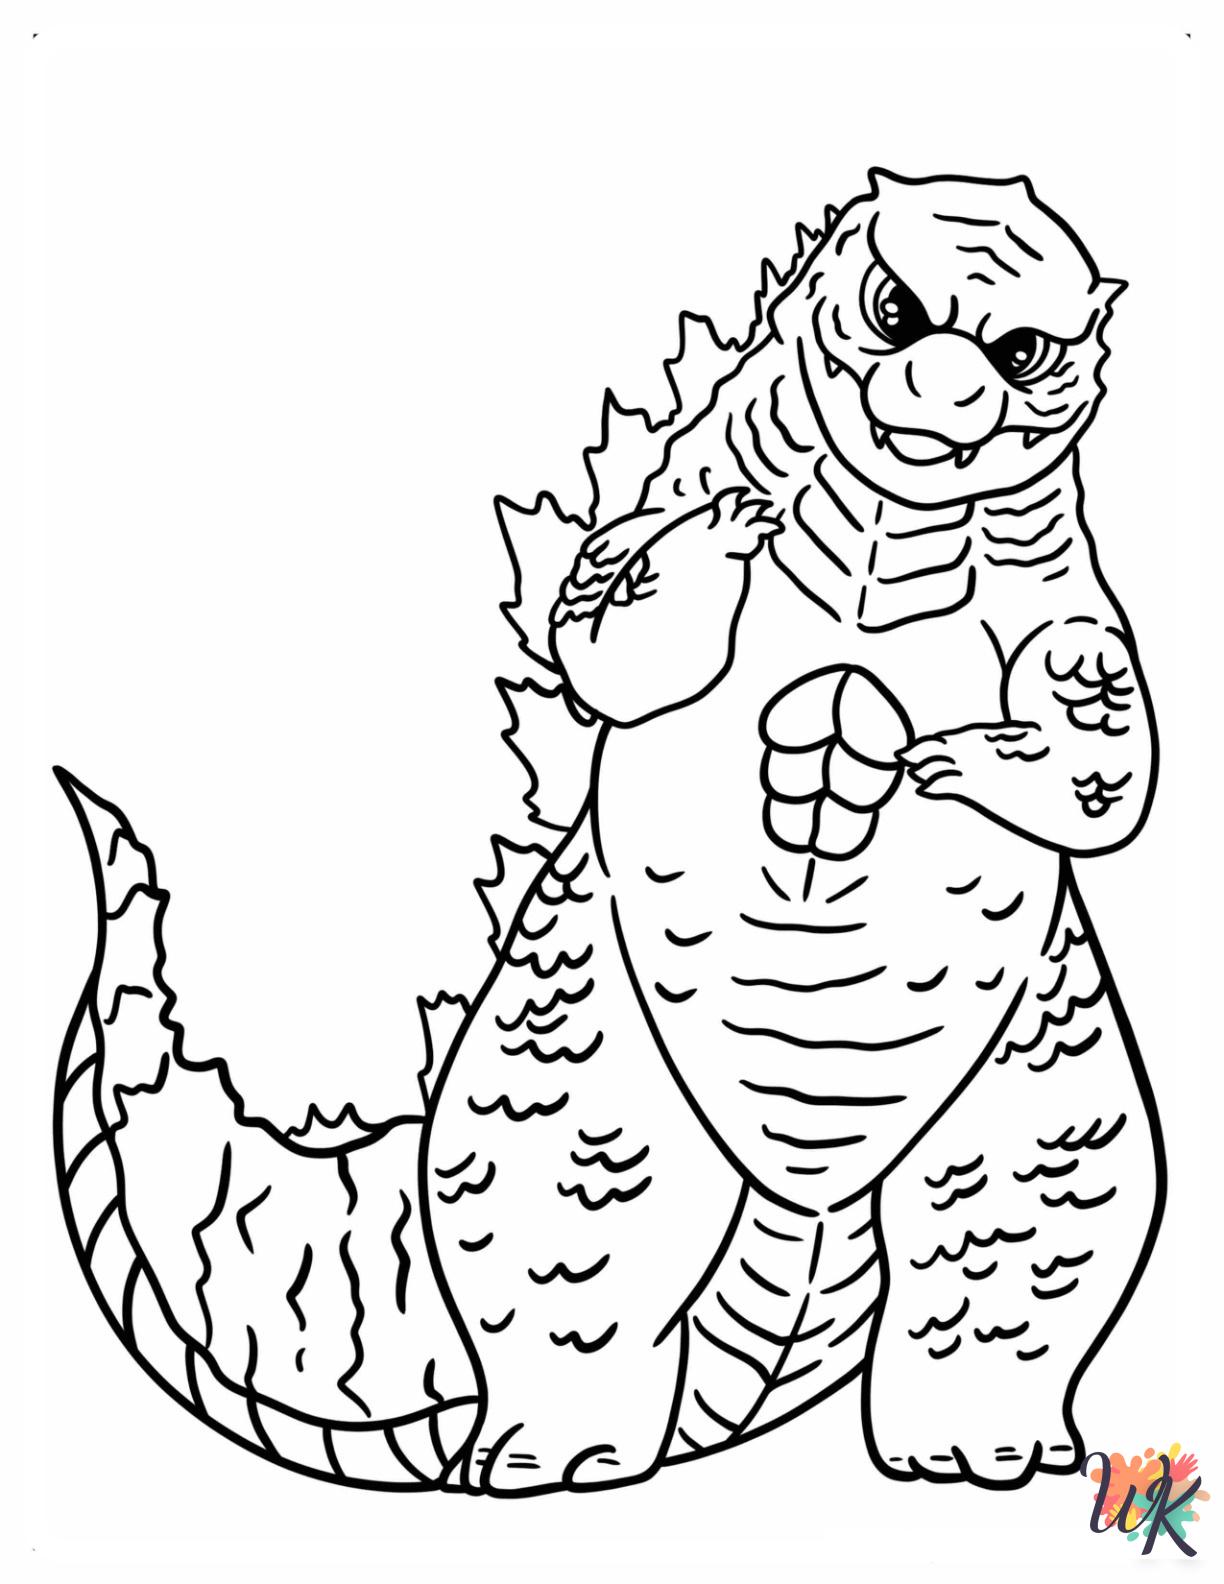 Godzilla coloring pages for adults easy